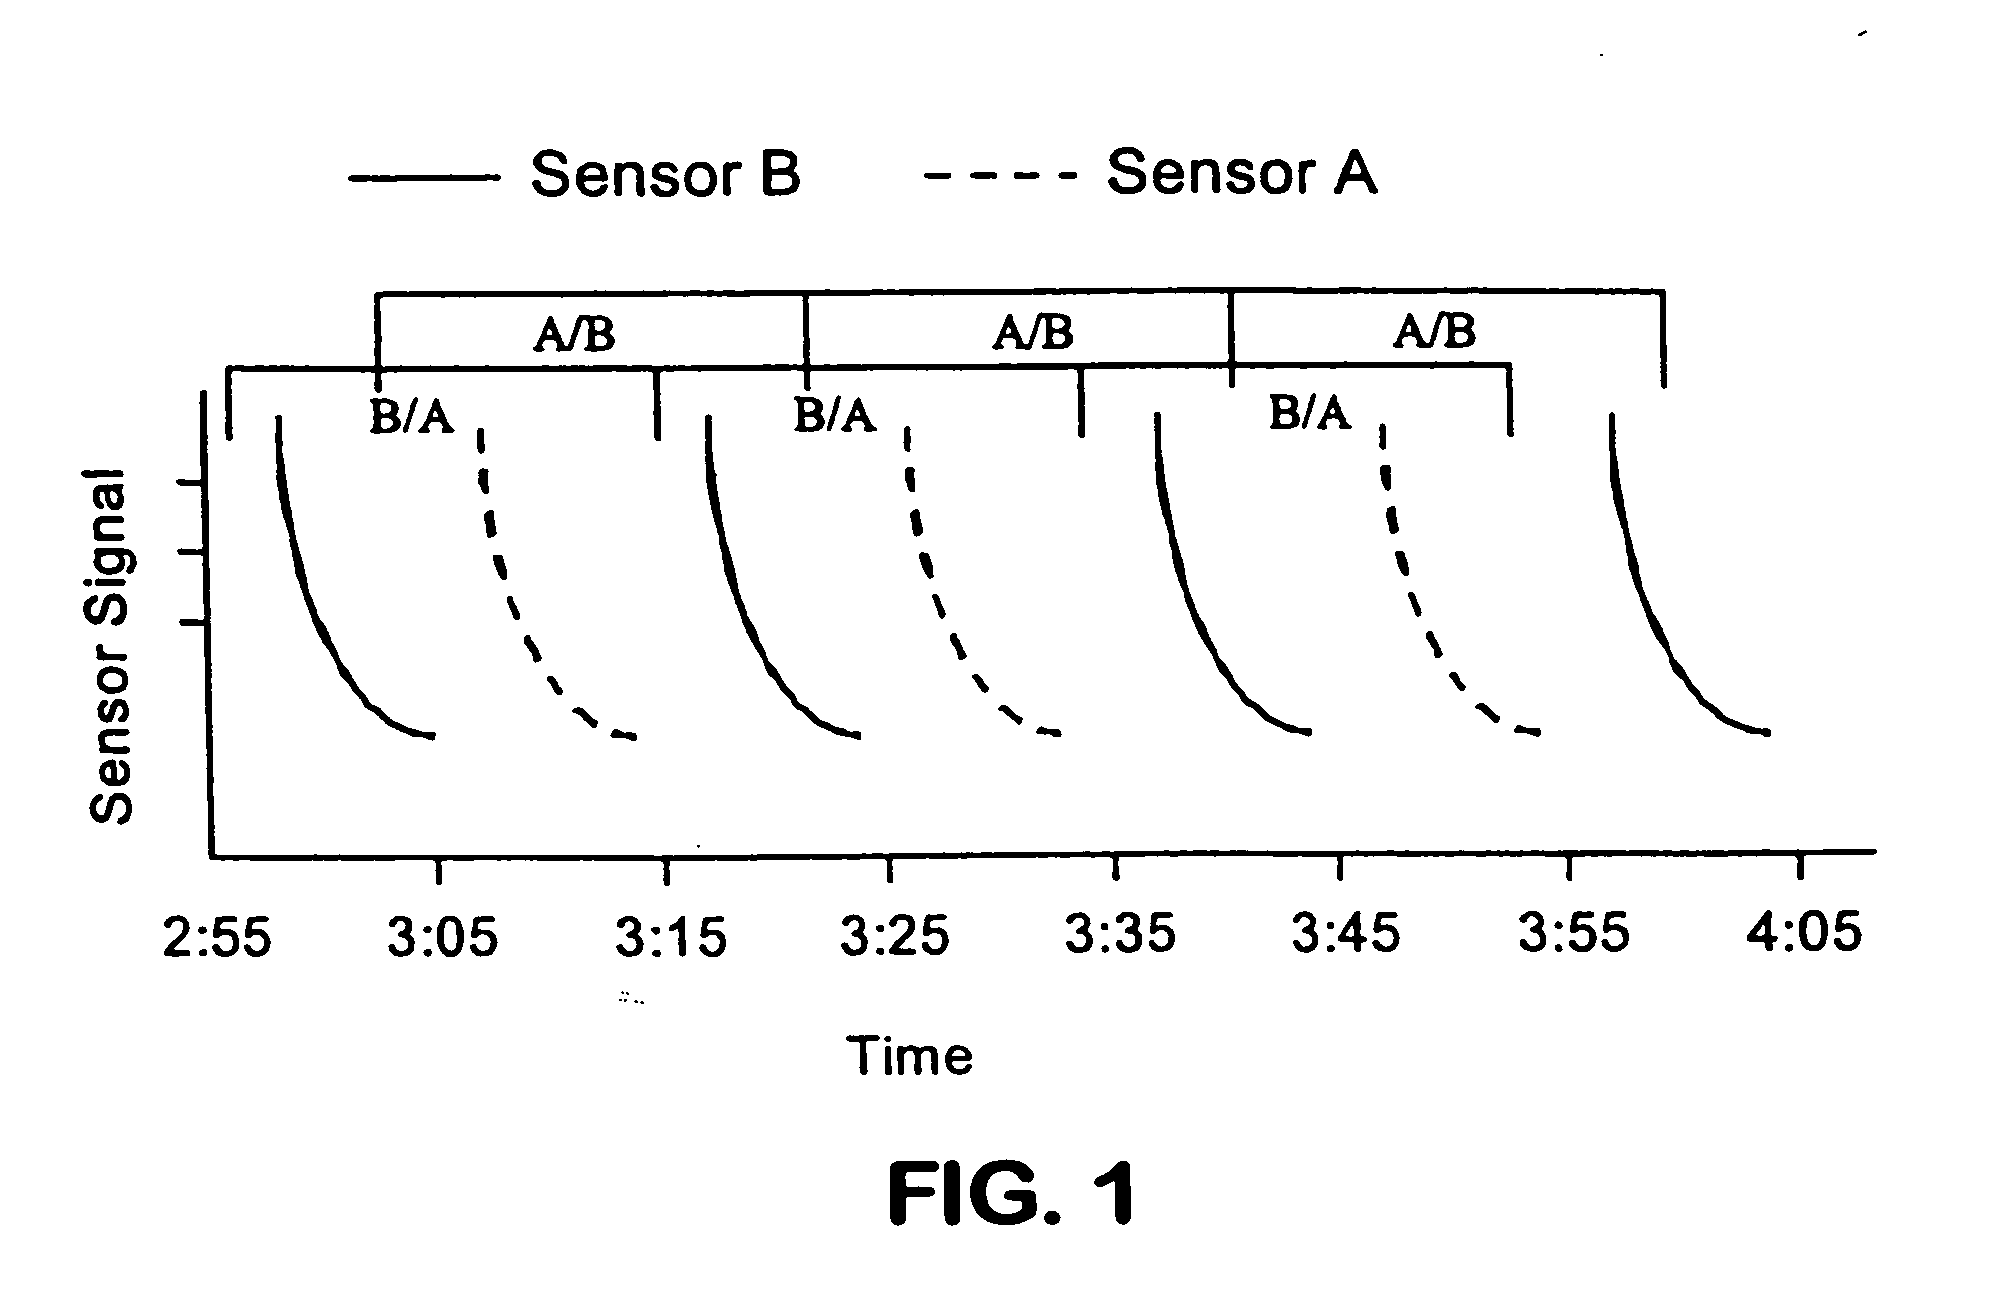 Methods for estimating analyte-related signals, microprocessors comprising programming to control performance of the methods, and analyte monitoring devices employing the methods